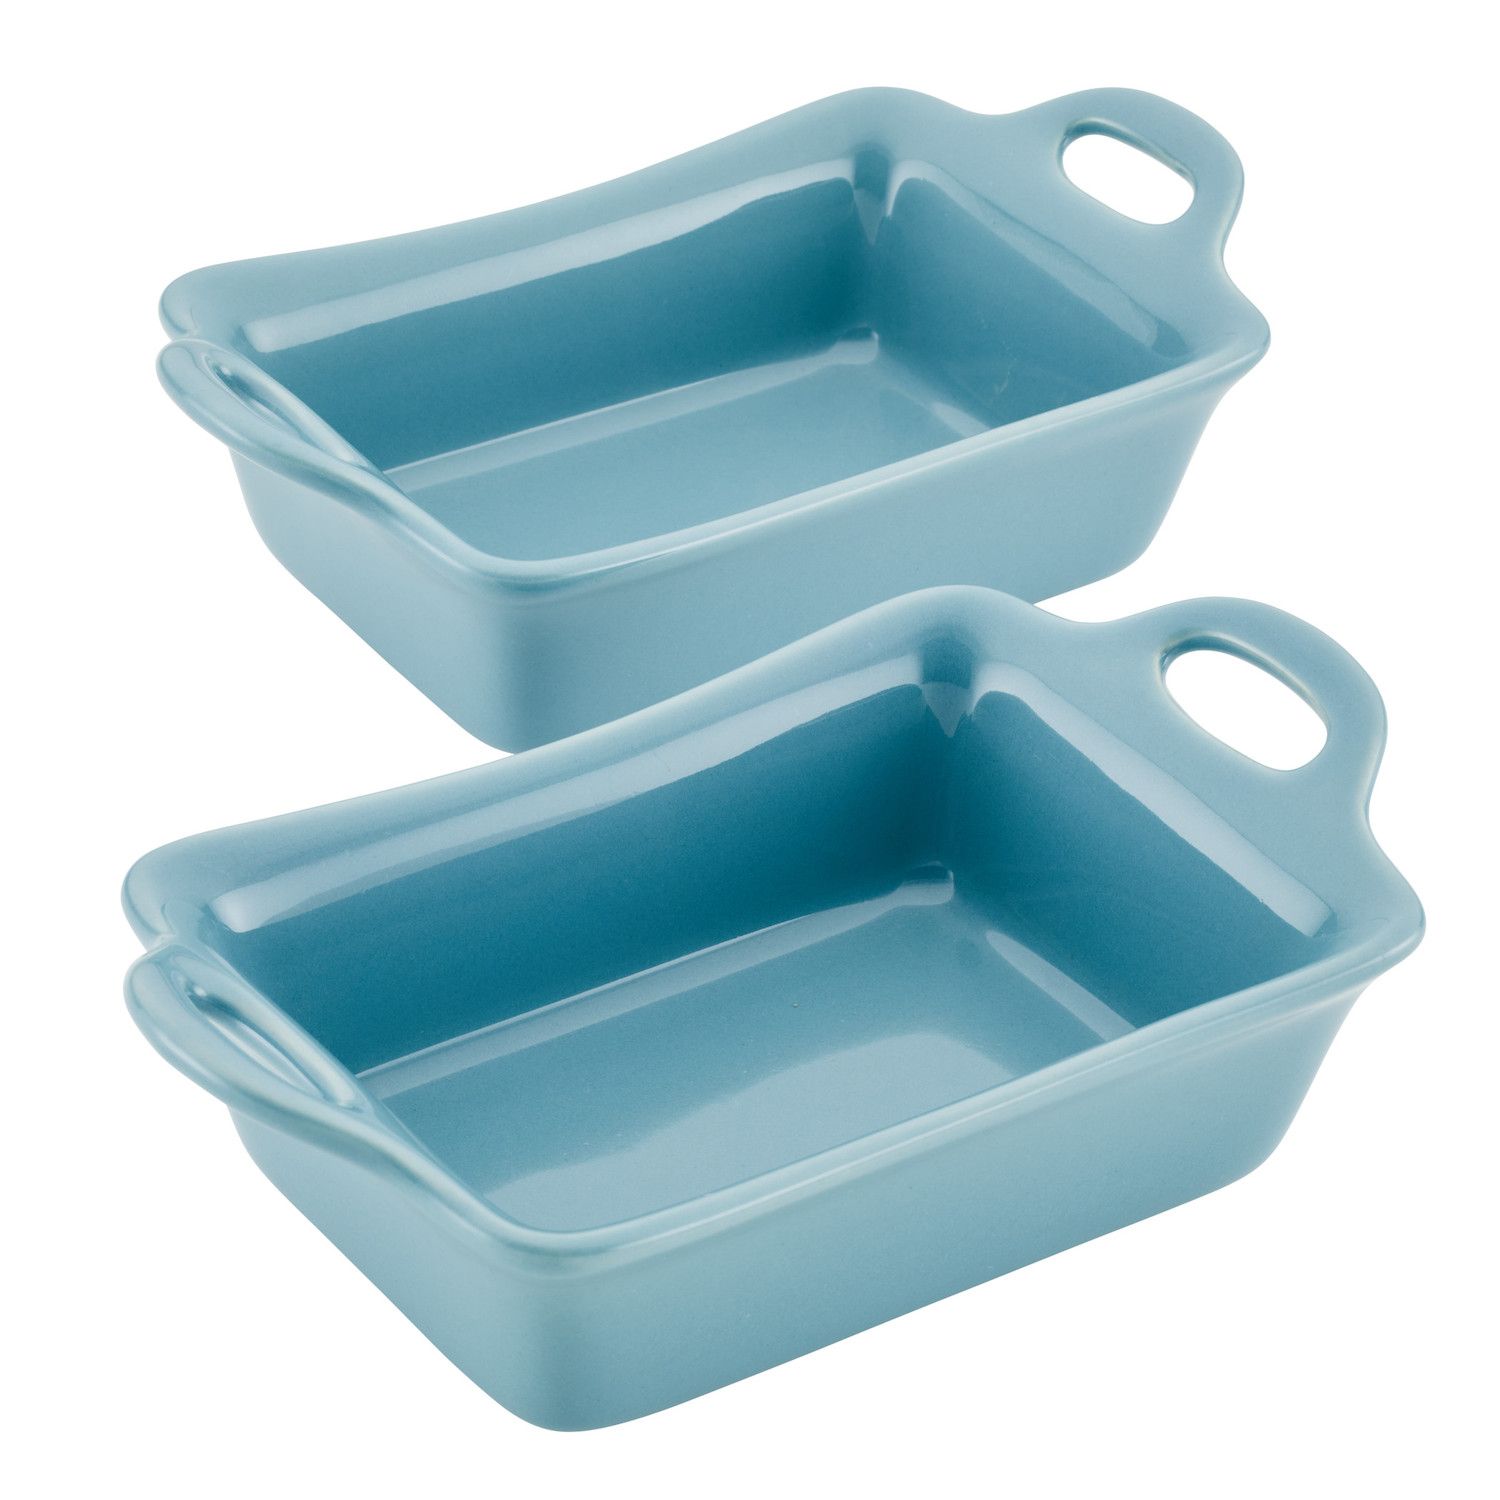 Rubbermaid DuraLite Glass Bakeware, 4-Piece Set, Baking Dishes or Casserole  Dishes, 2.5-Quart and 1.5-Quart (with Lids)